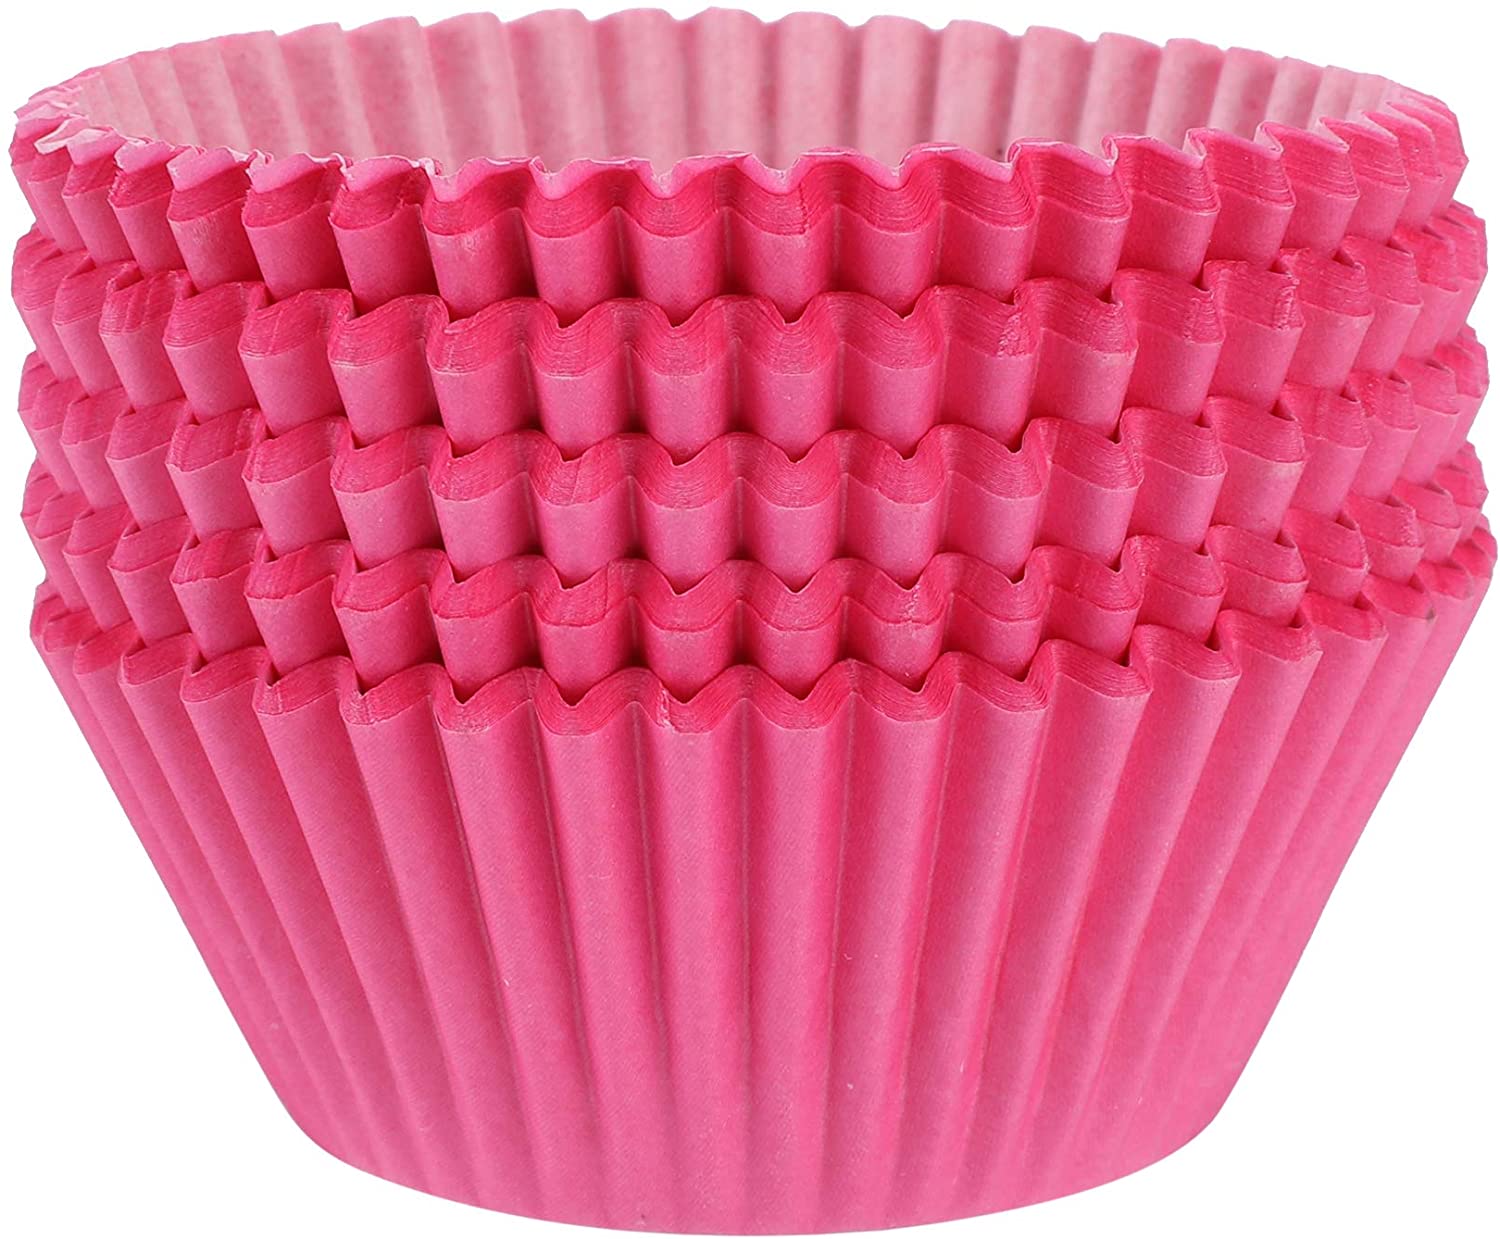 Pink Baking Cups